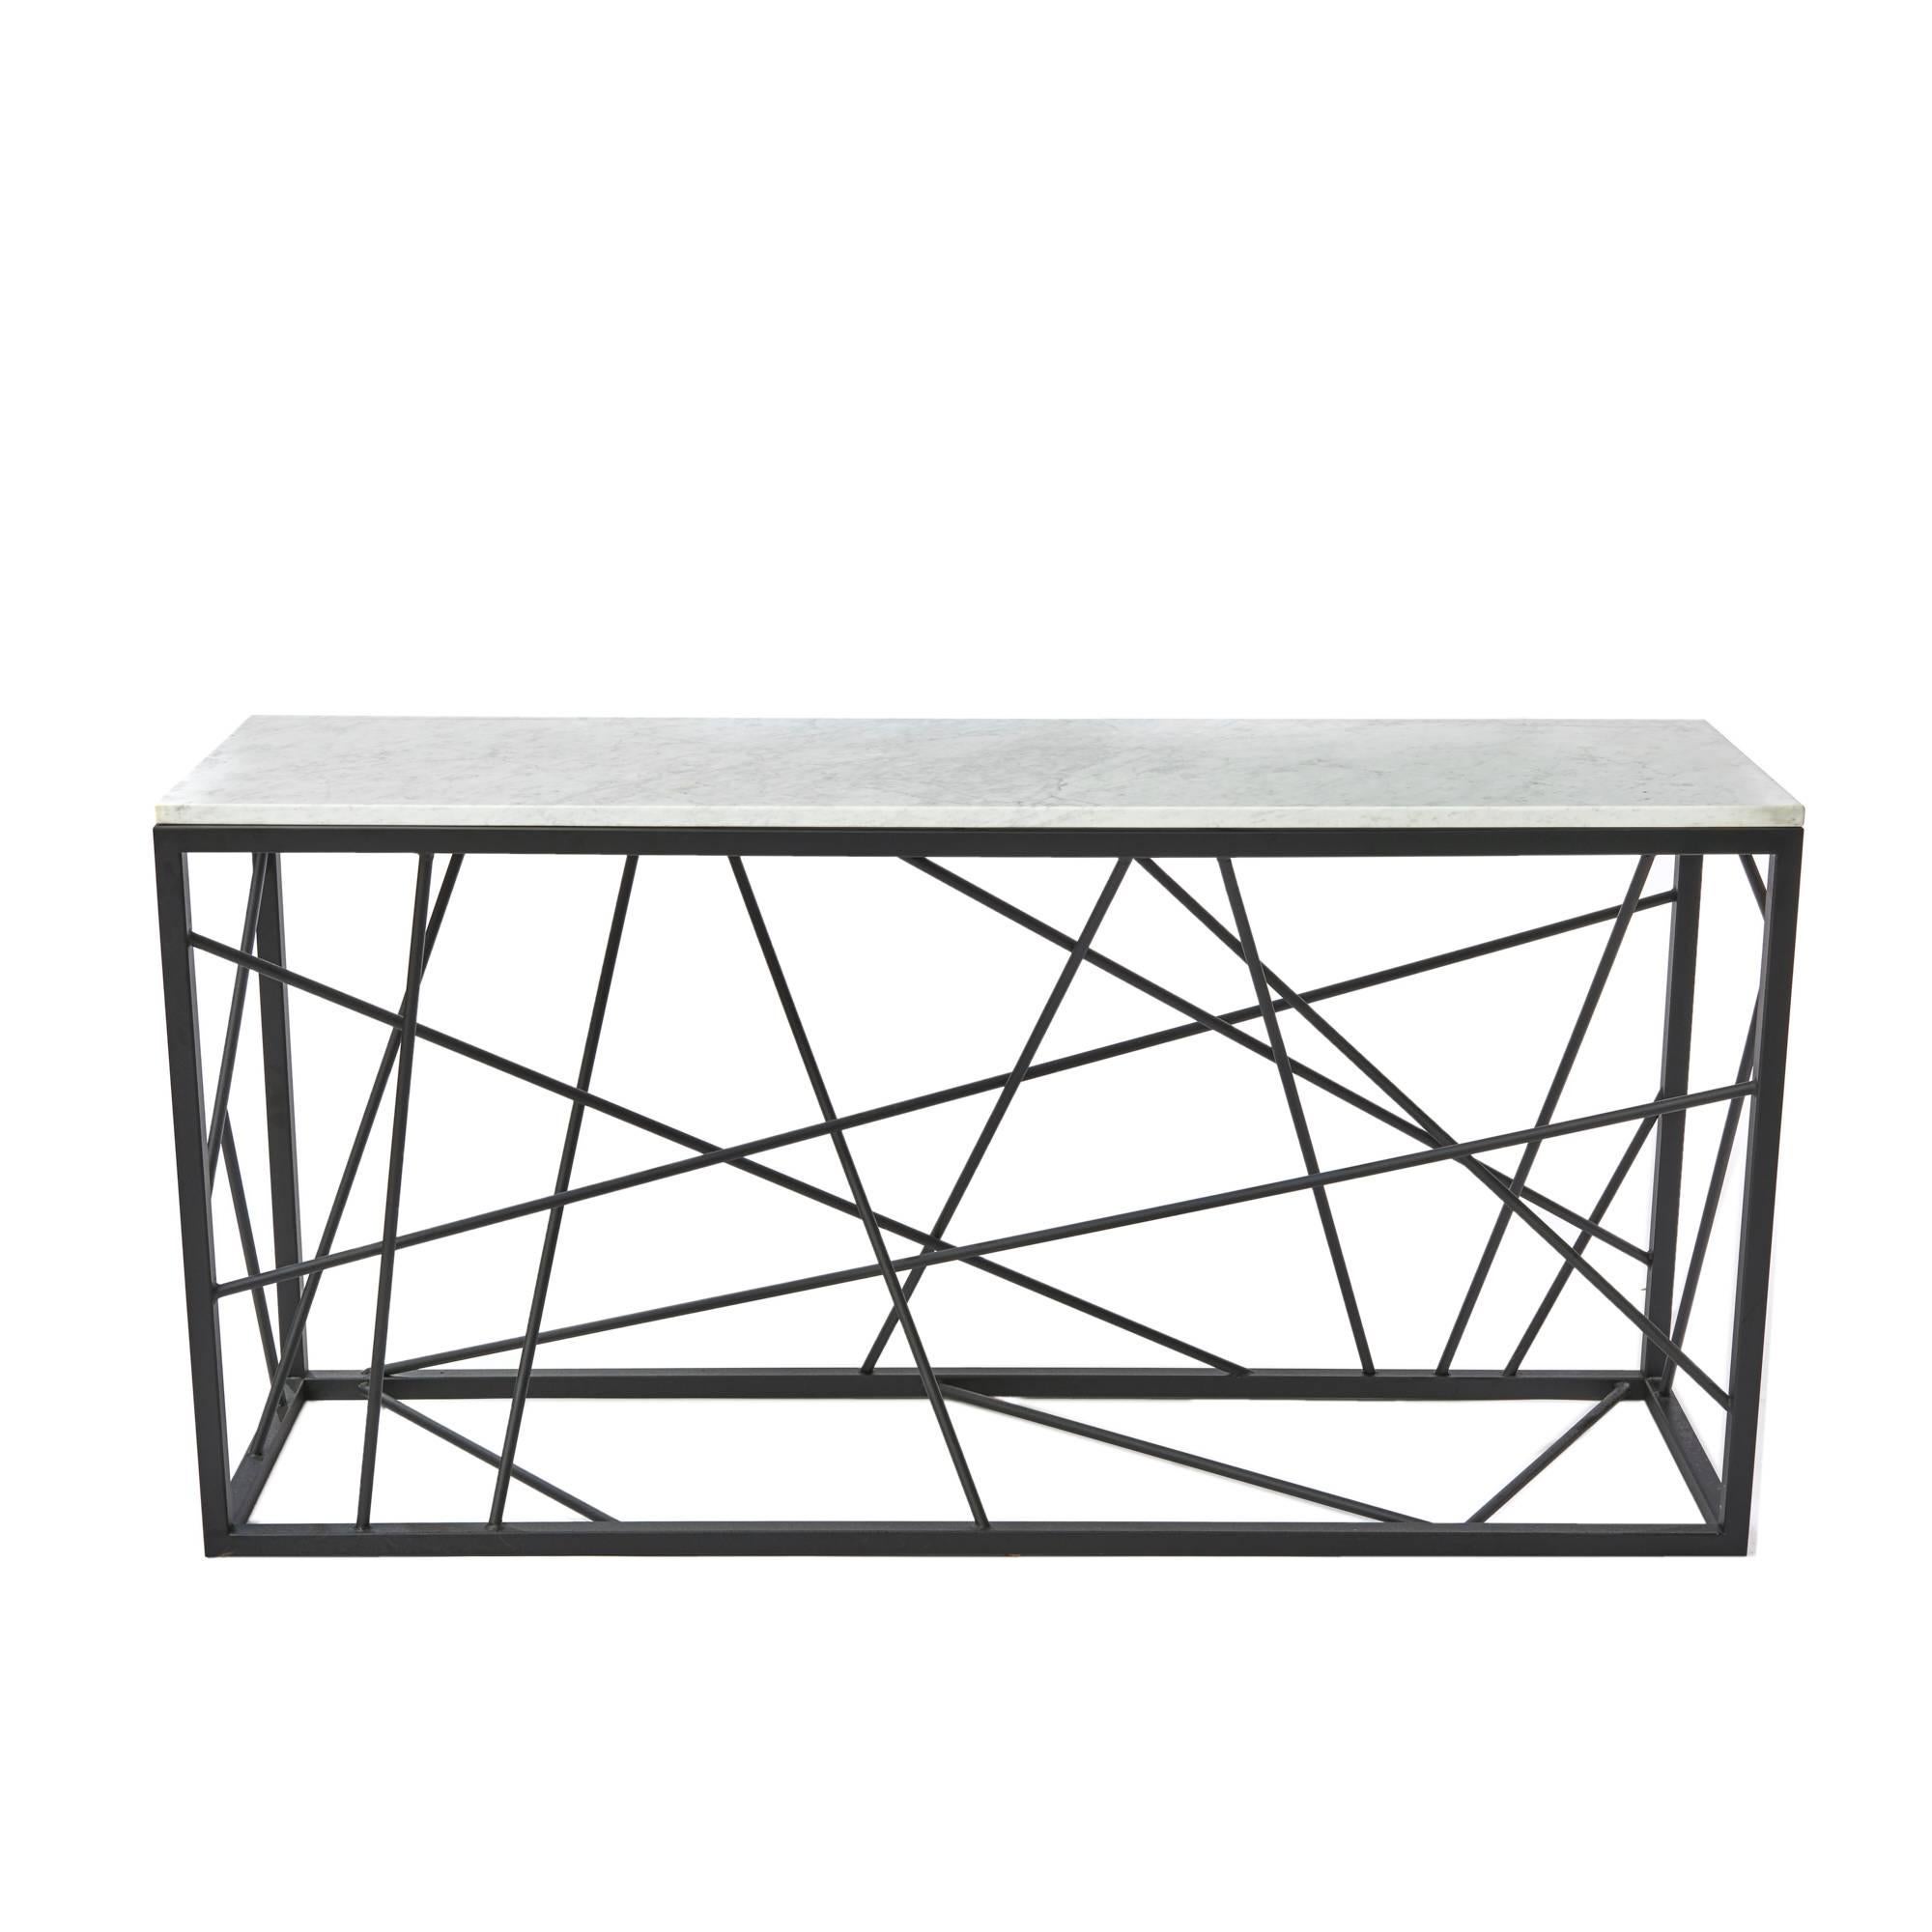 Nest Console by Morgan Clayhall, Sculptural Console, Steel and Marble Table im Angebot